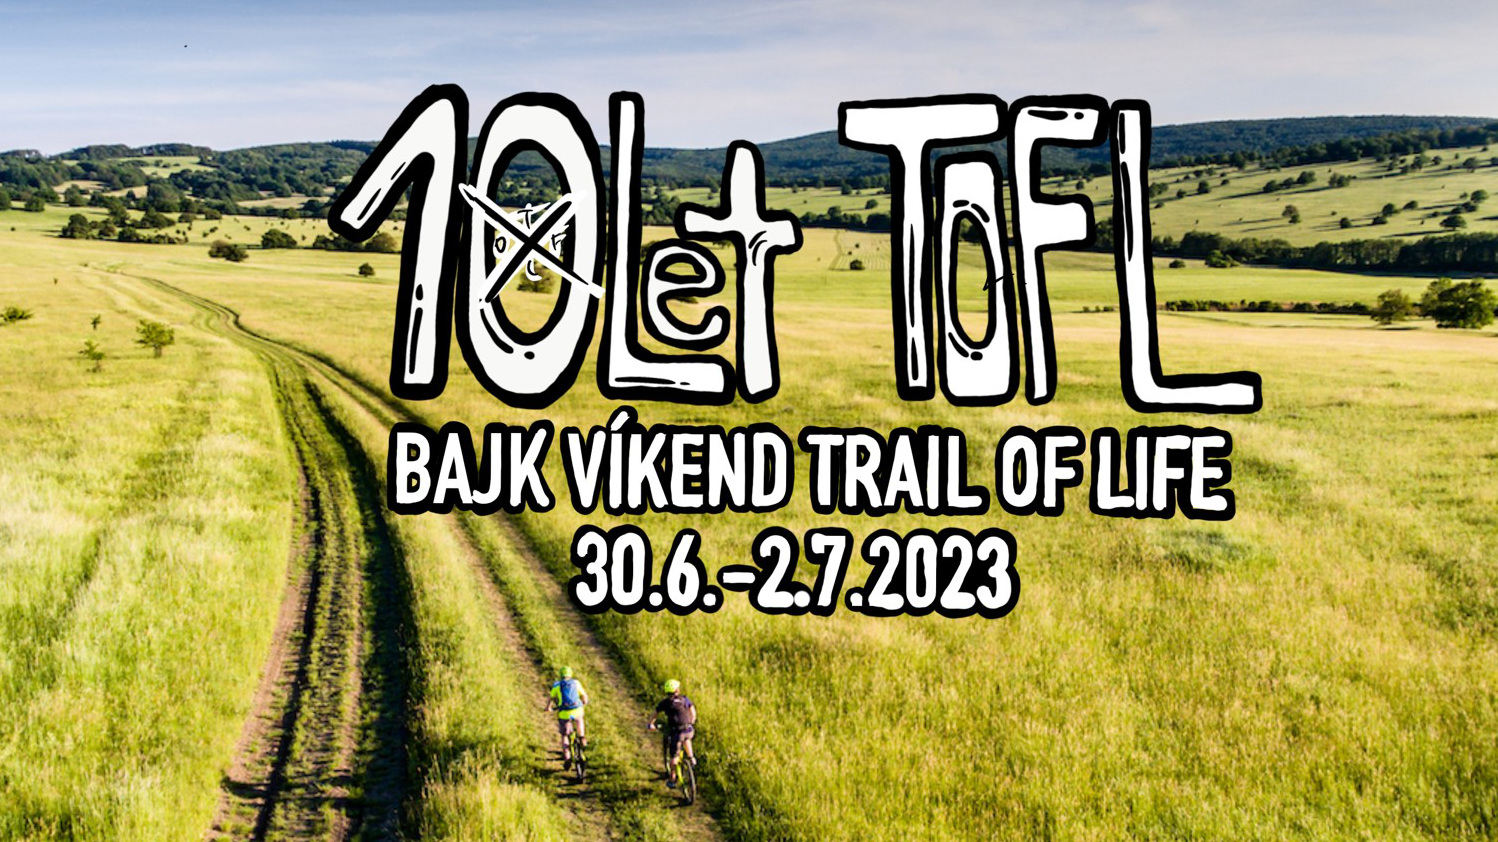 10 let Trail of Life